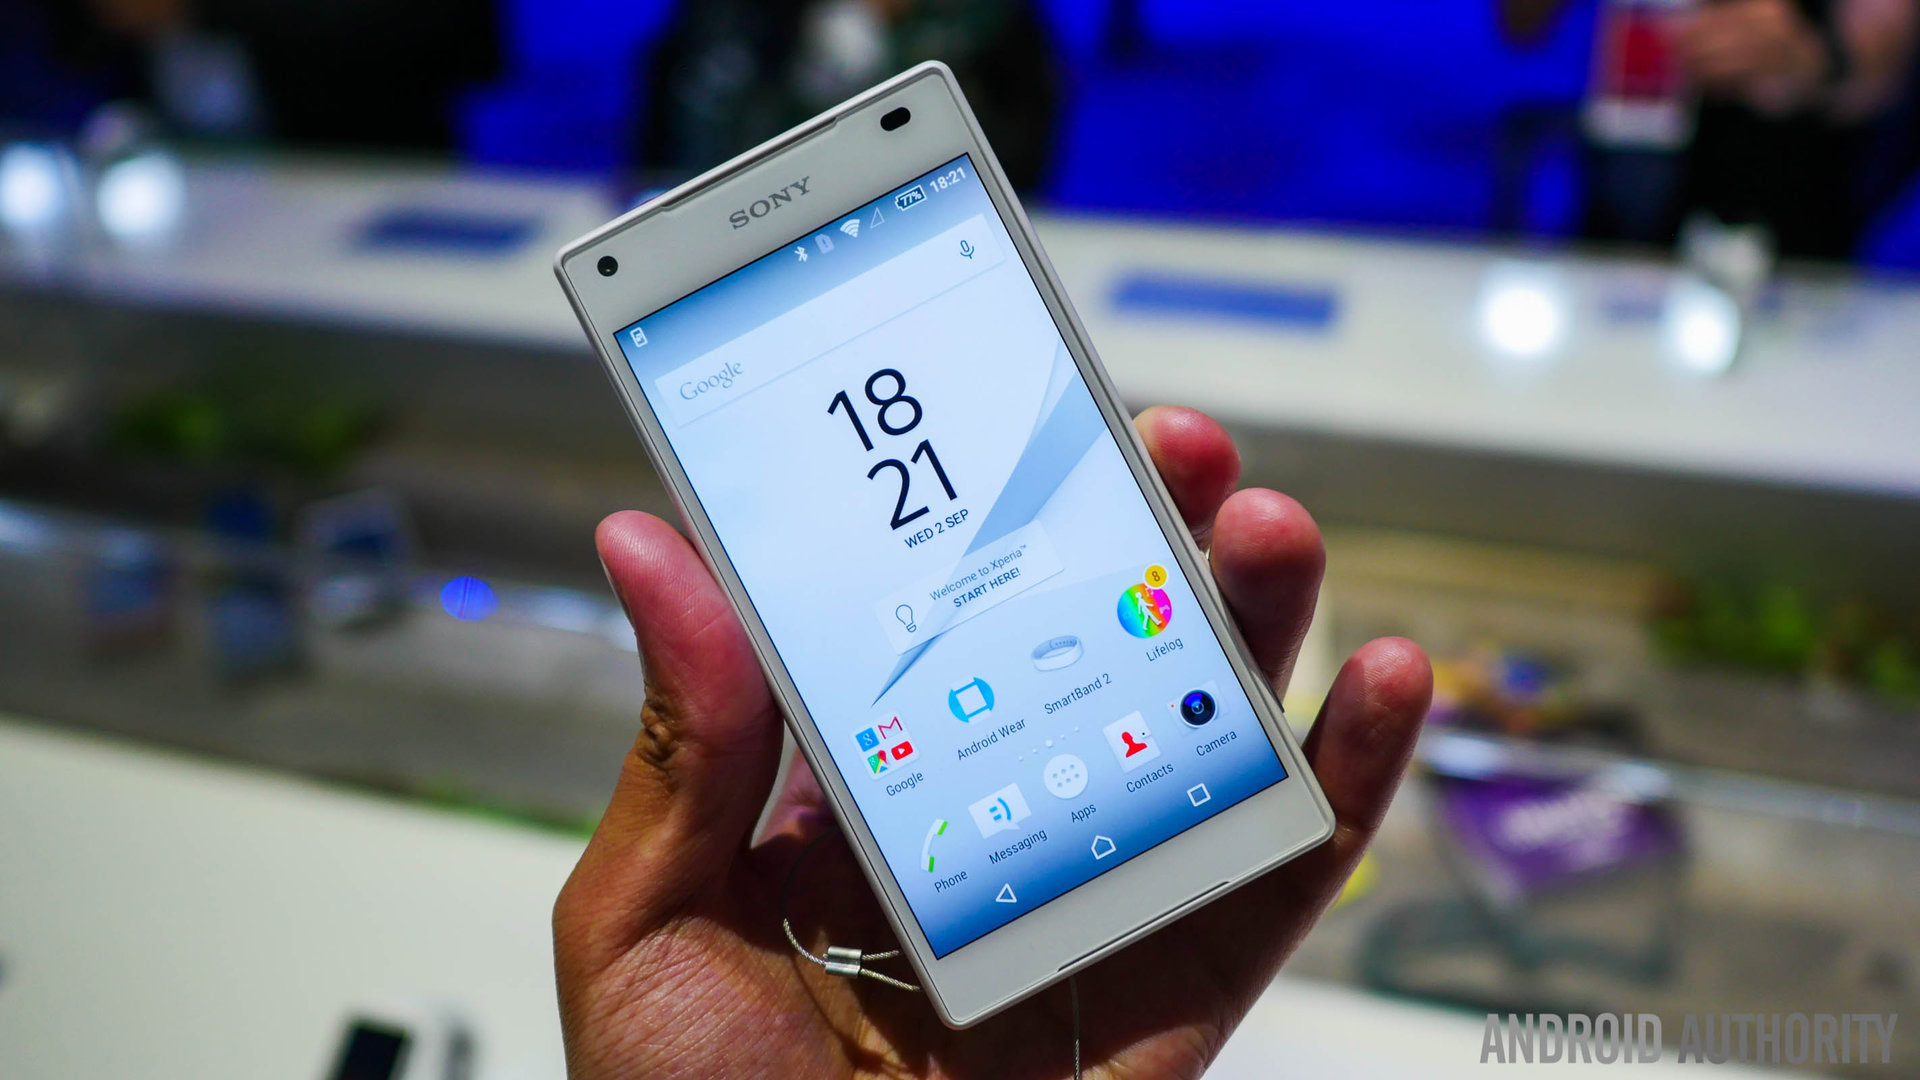 schedel Blaast op Jeugd Sony Xperia Z5 Compact hands-on and first look